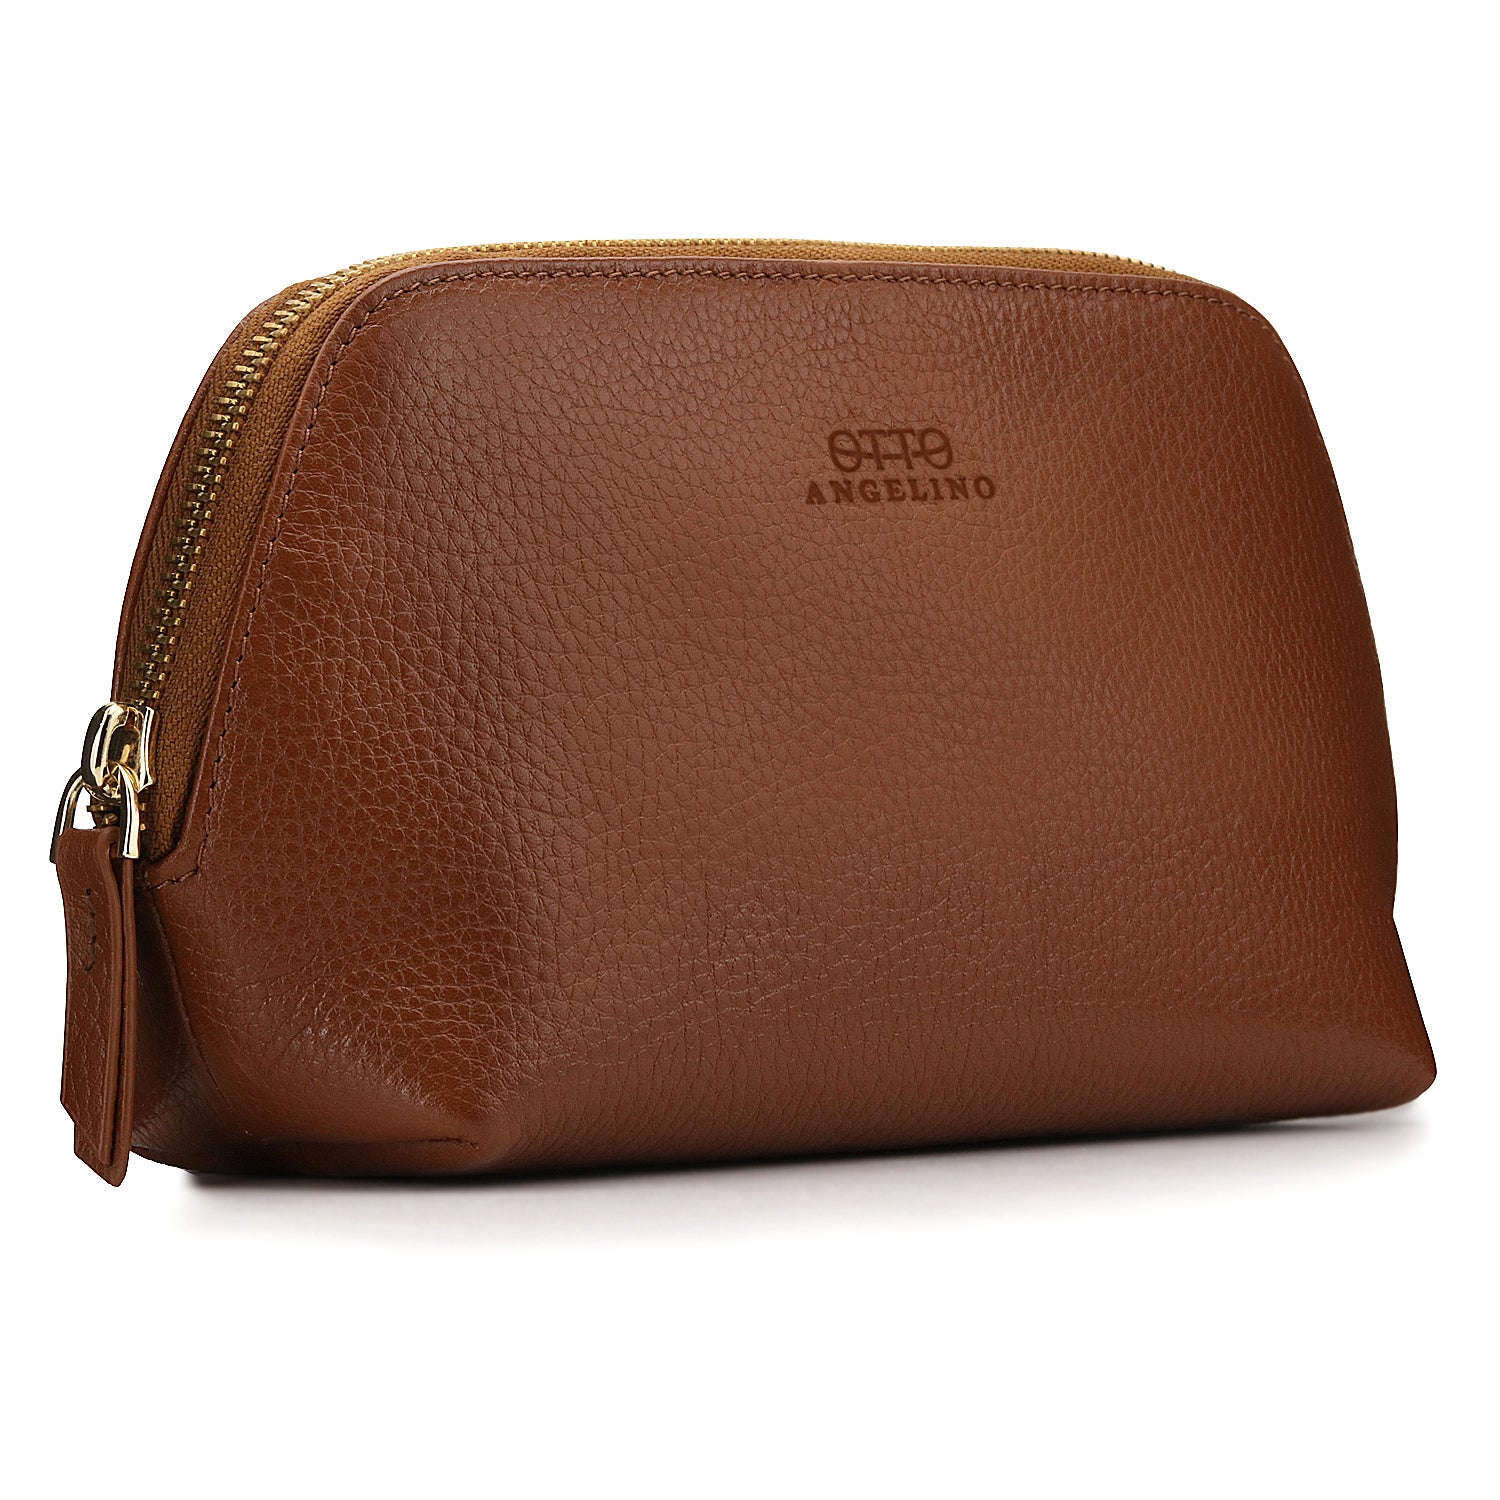 Large Slim Leather Makeup Pouch | The Zeta | 25-Year Warranty